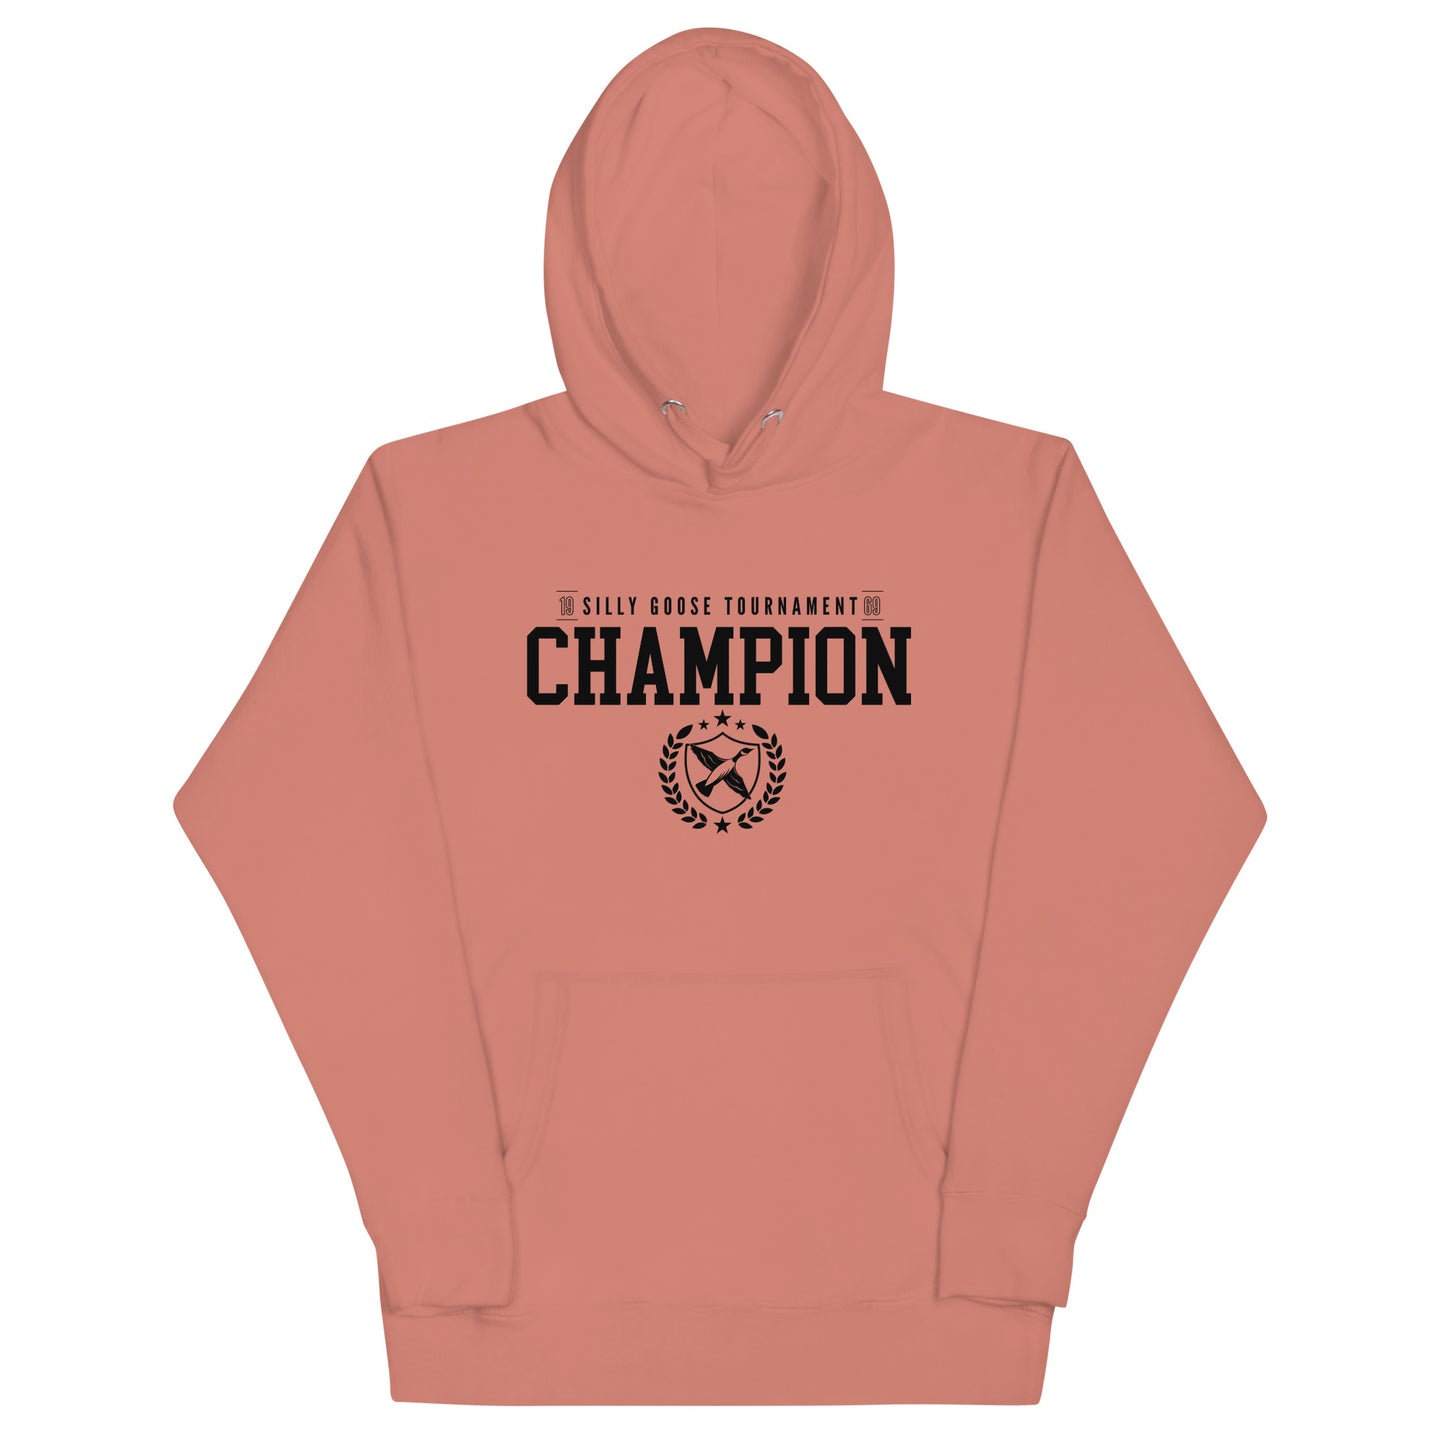 Silly Goose Tournament Champion Unisex Hoodie